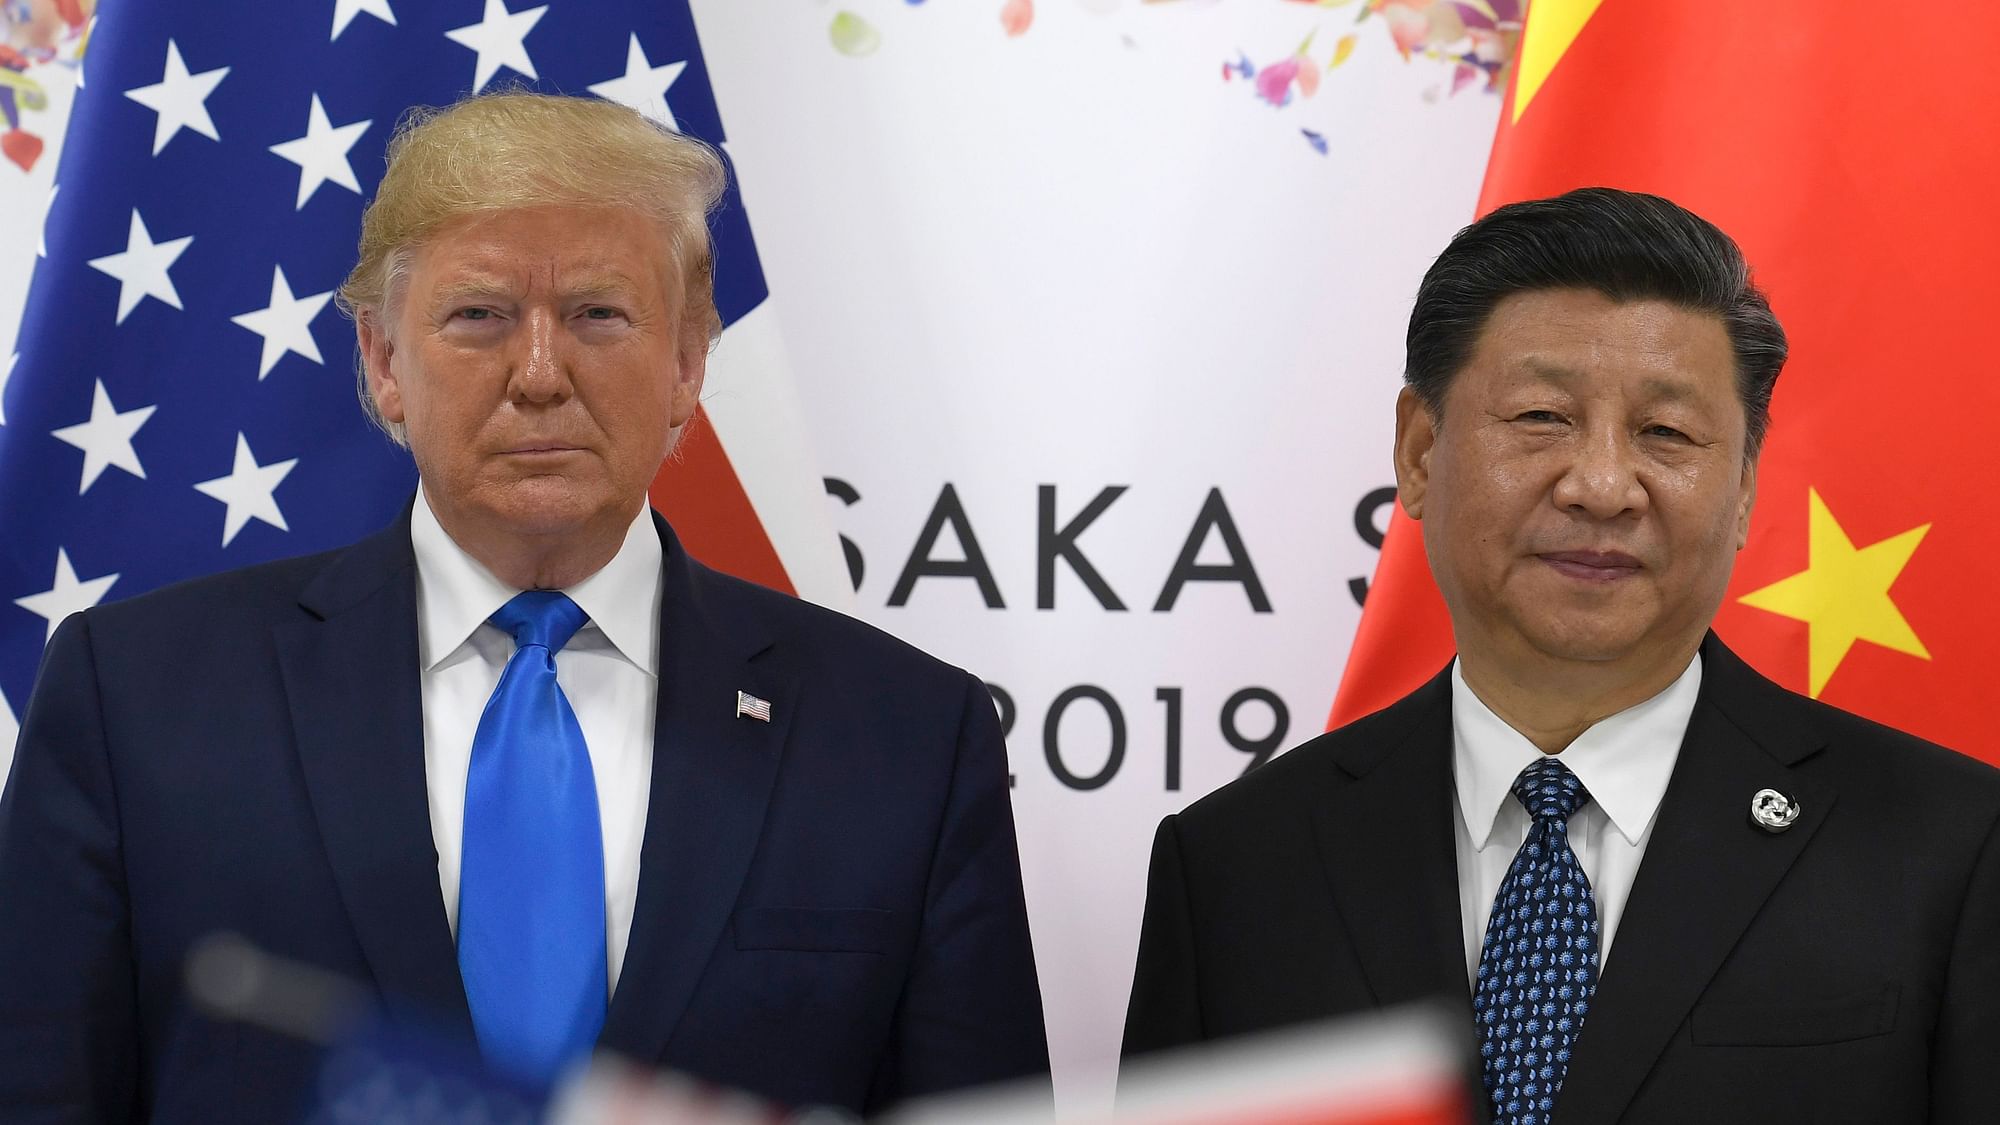 Left: US President Donald Trump. Right: Chinese President Xi Jinping